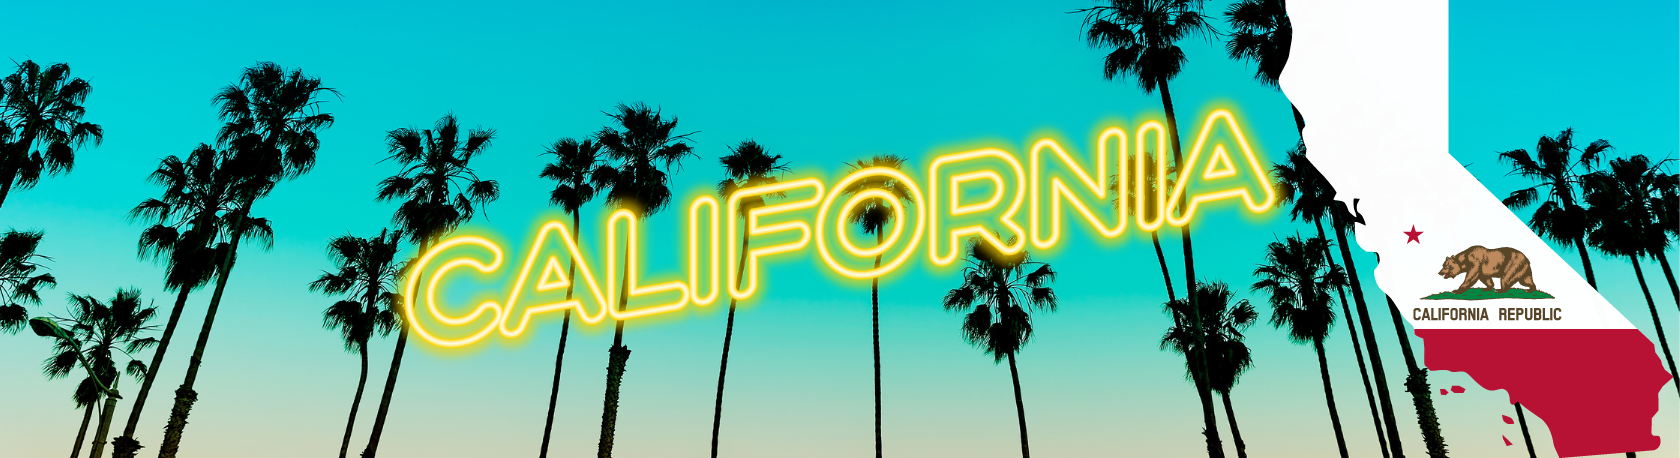 Master your Spanish listening skills while learning the history of the name ‘California’